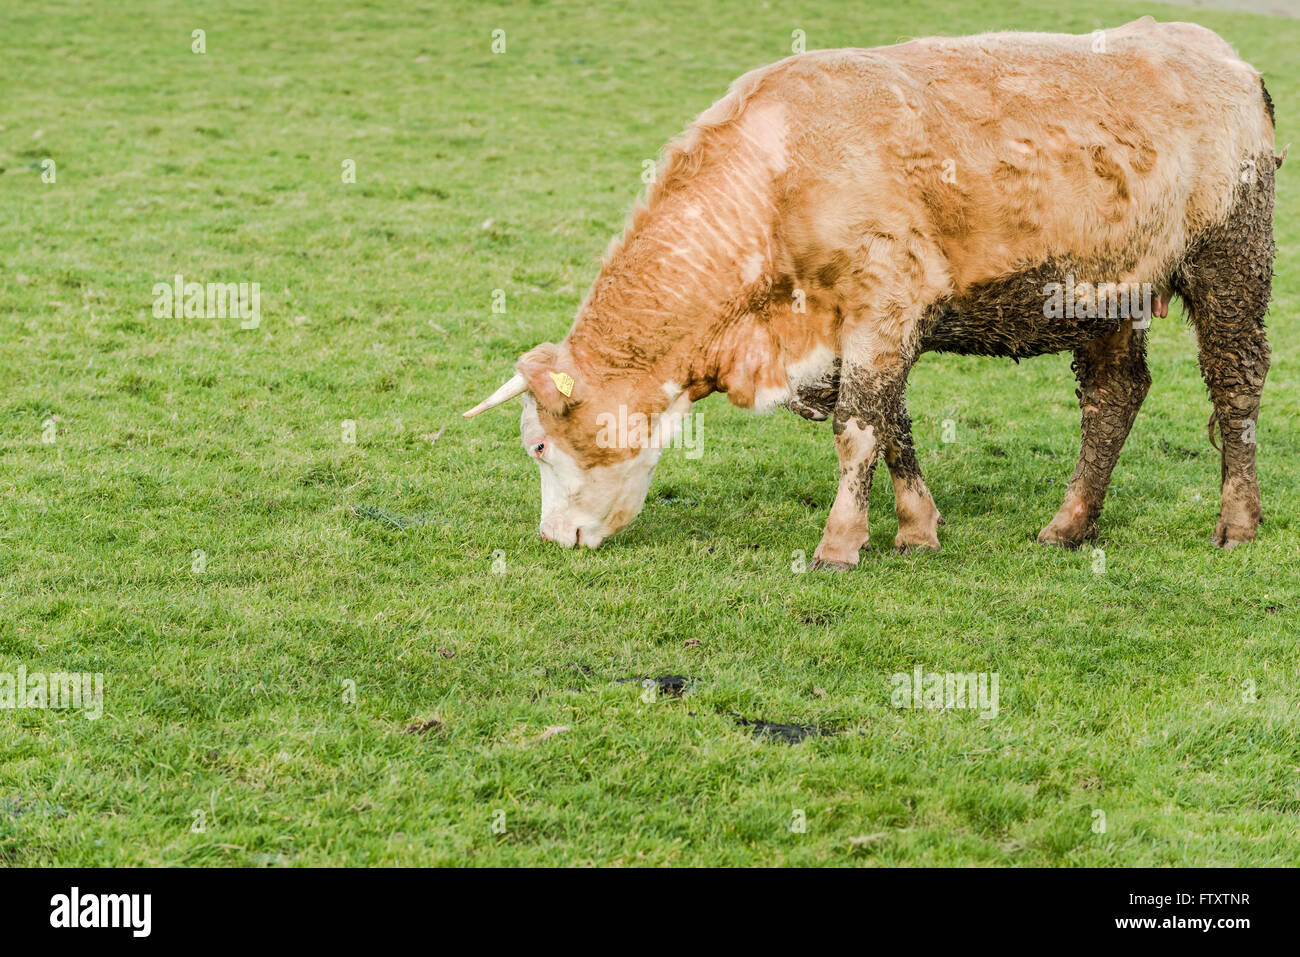 Cow grazing on green grass, english breed Stock Photo